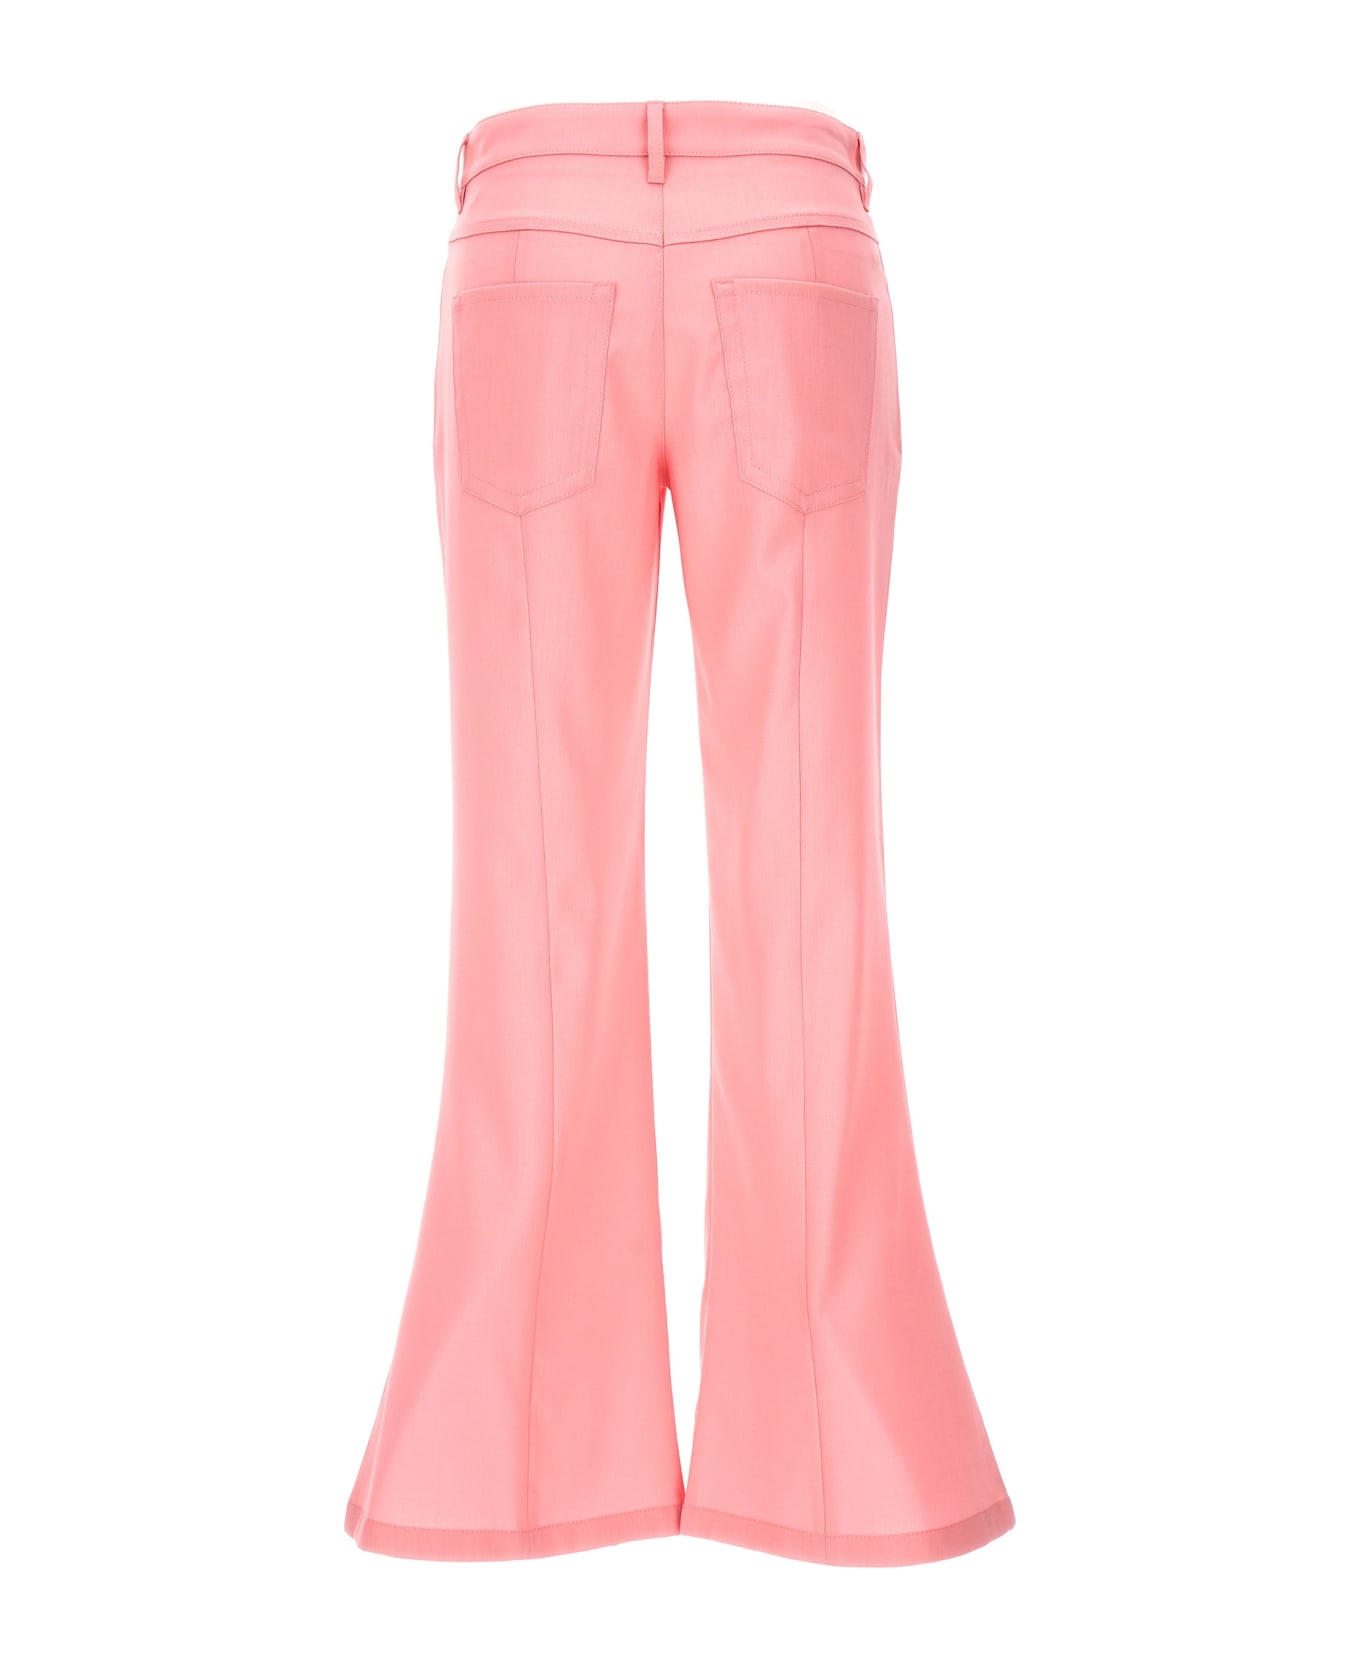 Marni Logo Embroidery Wool Trousers - Pink Gummy ボトムス